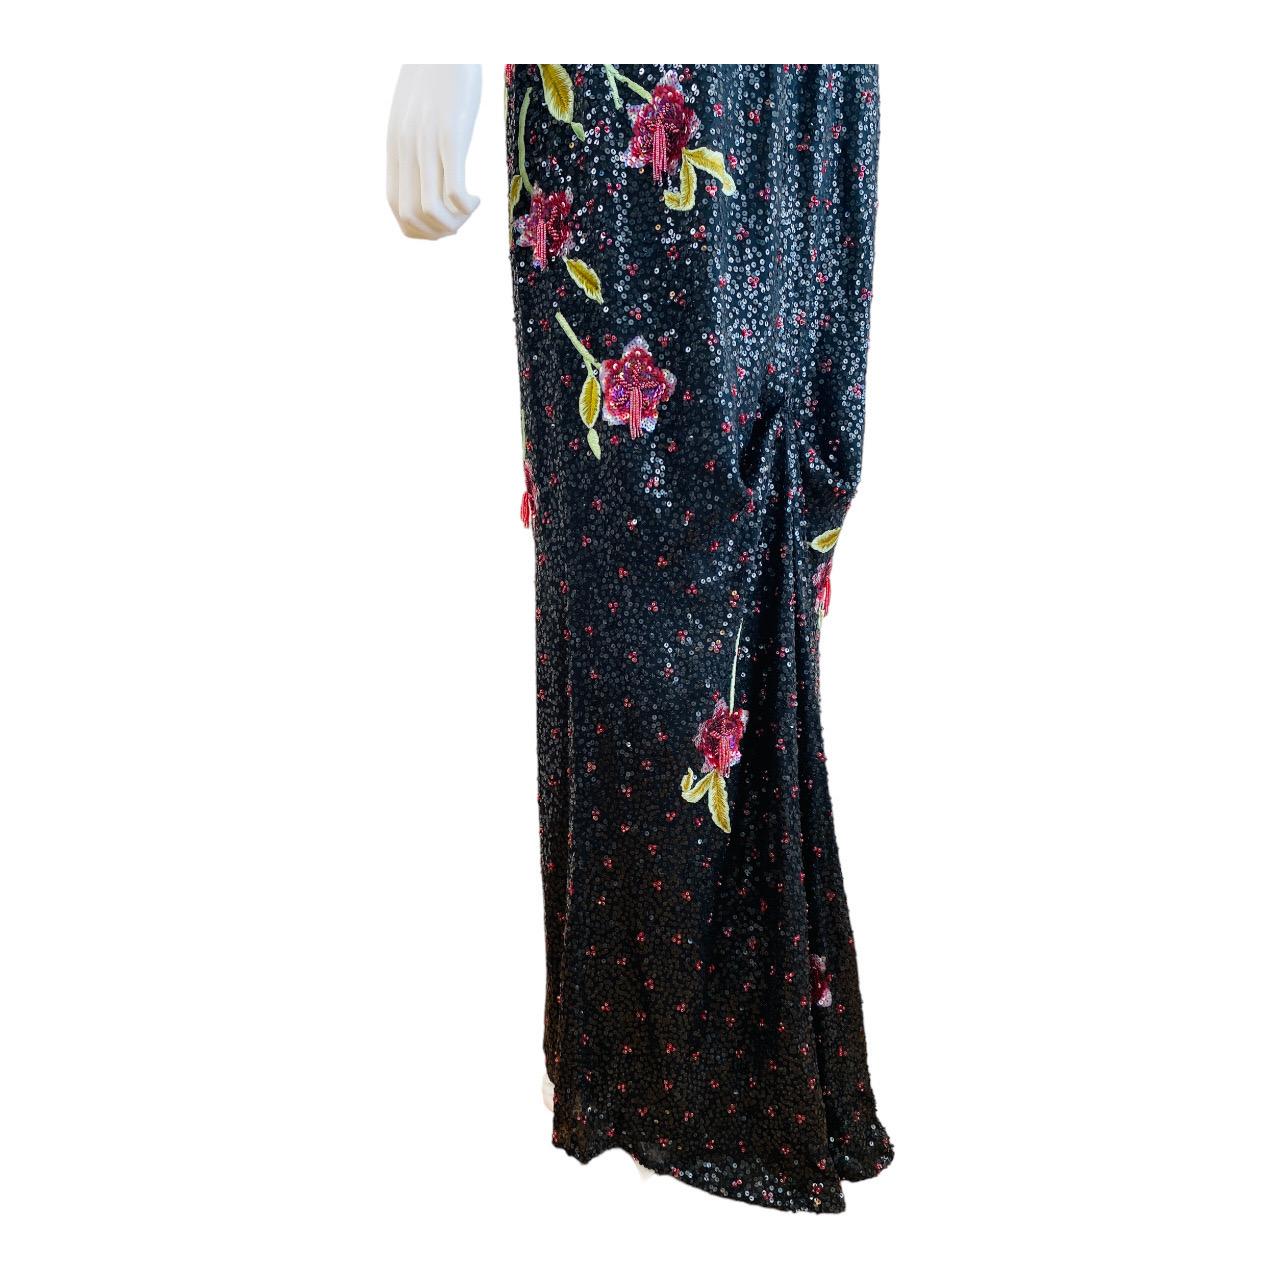 Vintage 2002 Escada Hand Beaded Sequin Floral Maxi Dress Gown Black Pink Flowers 3